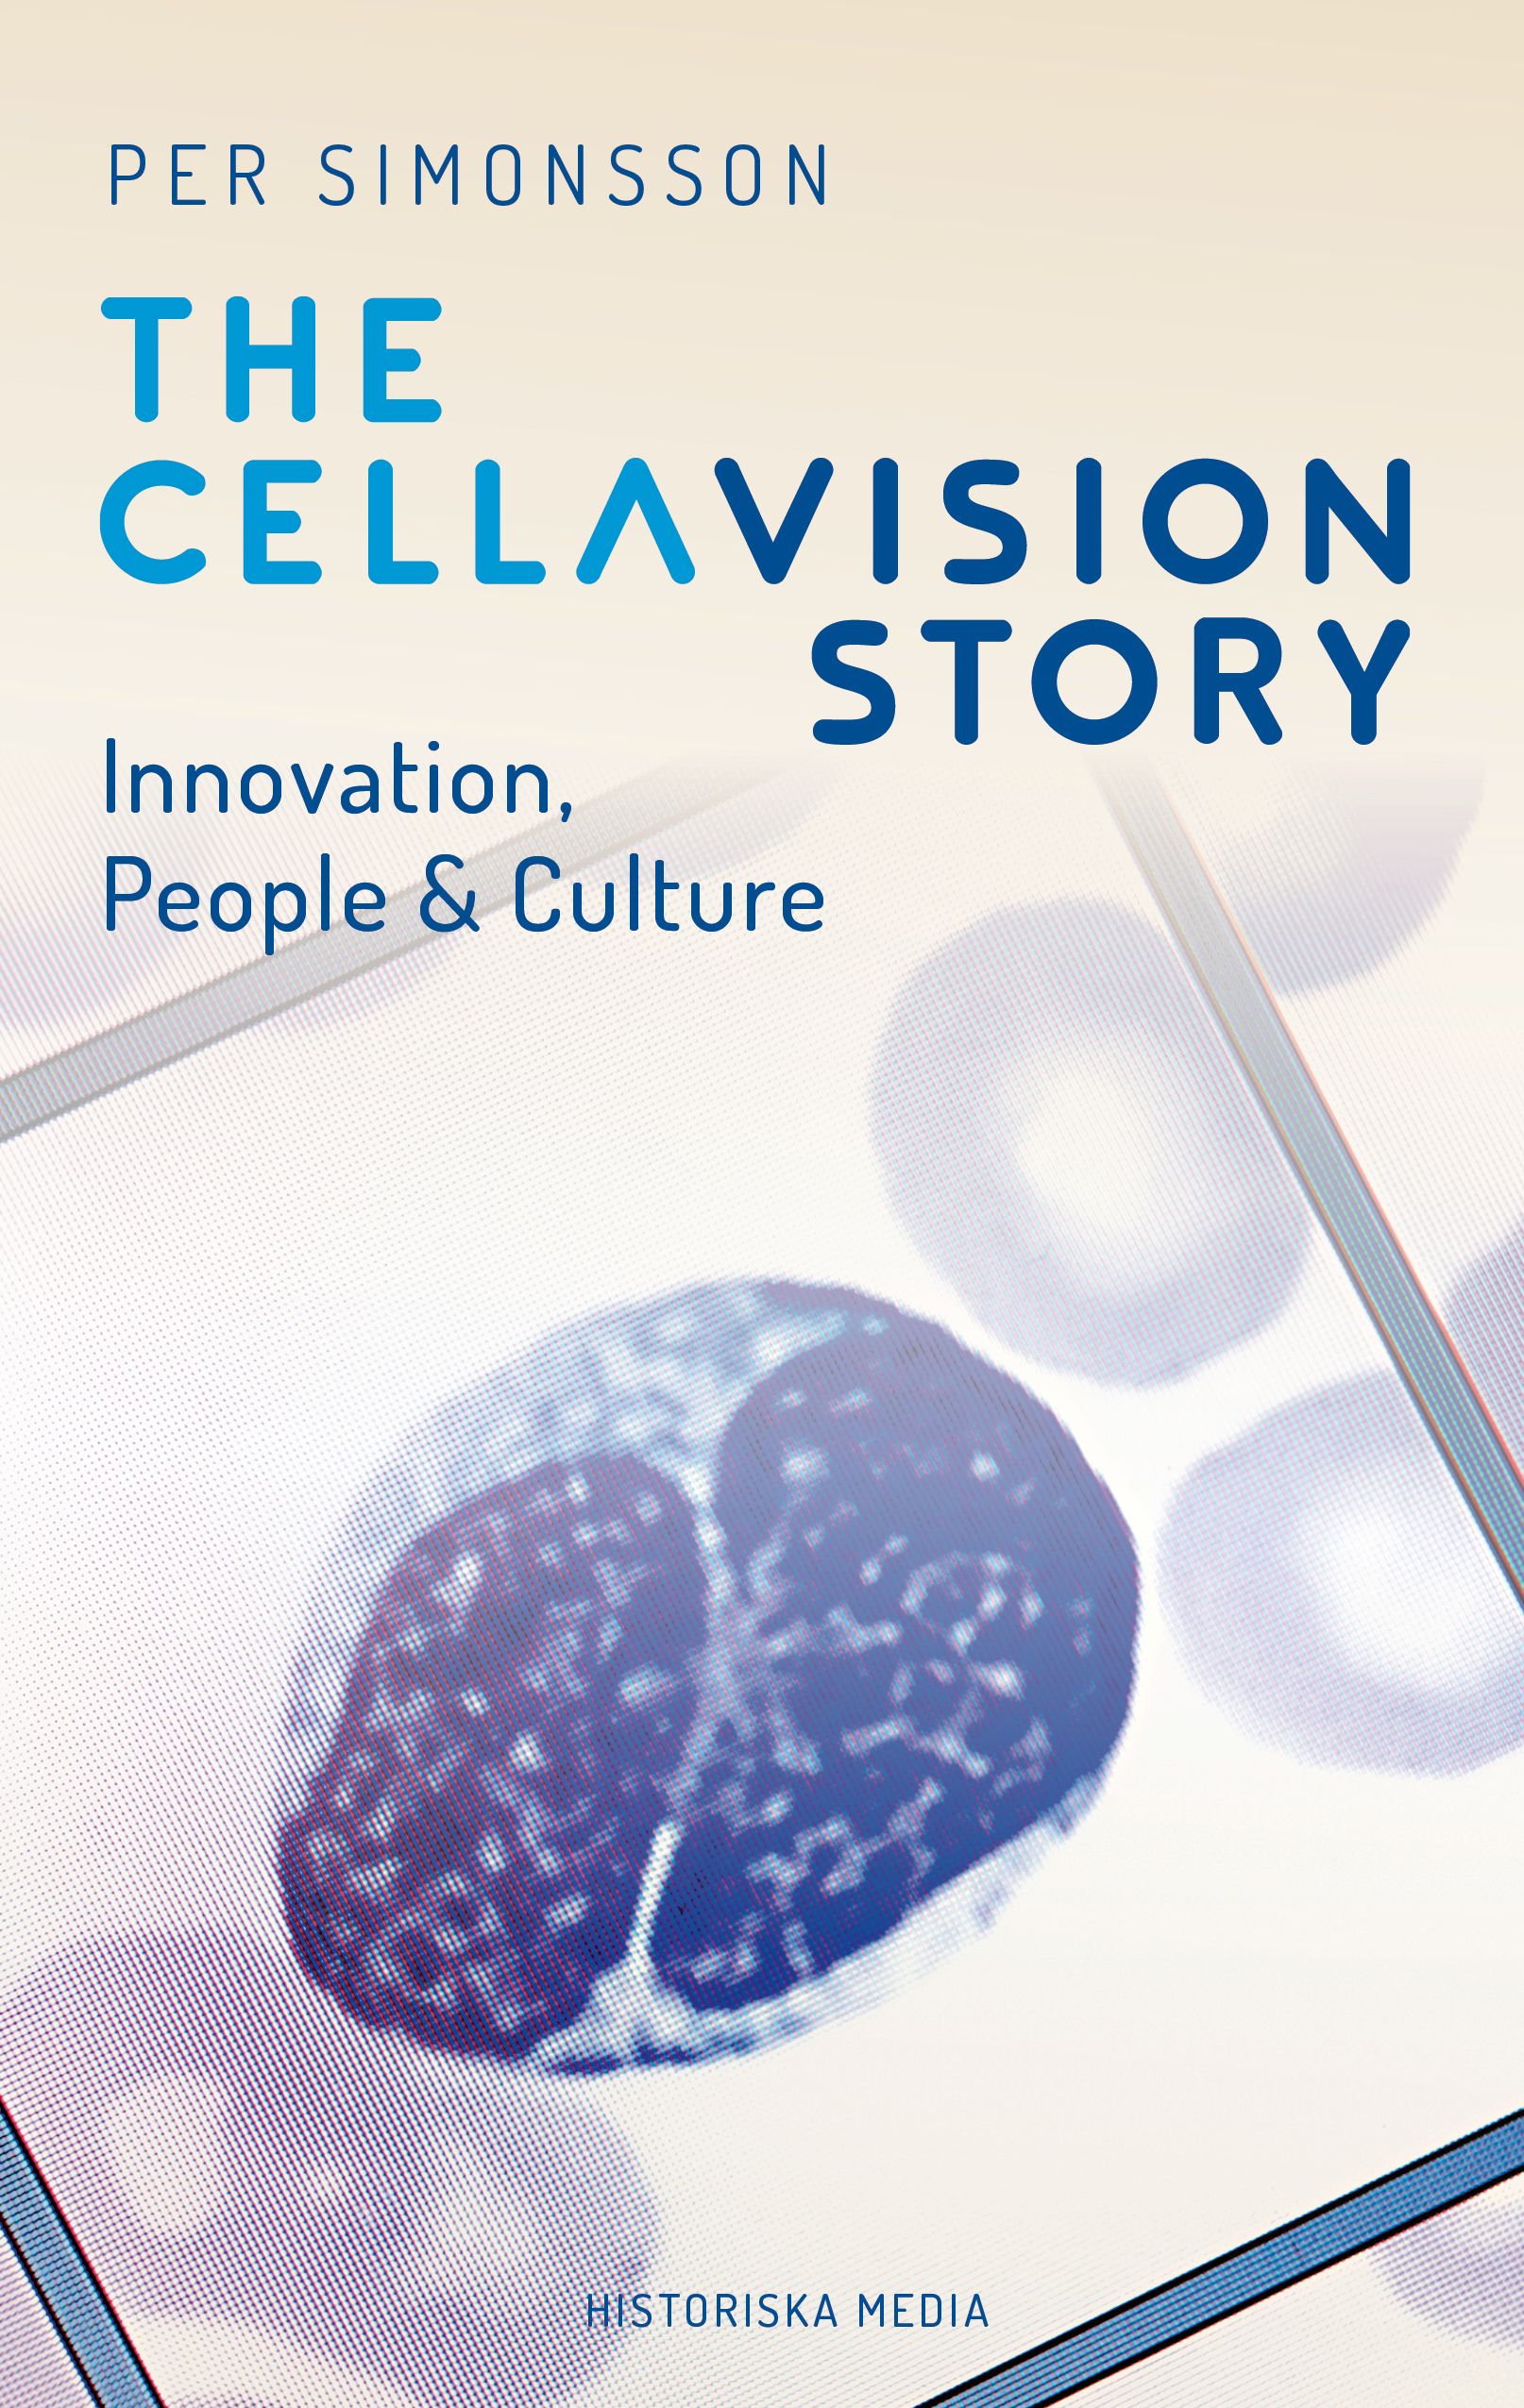 The CellaVision Story, eBook by Per Simonsson